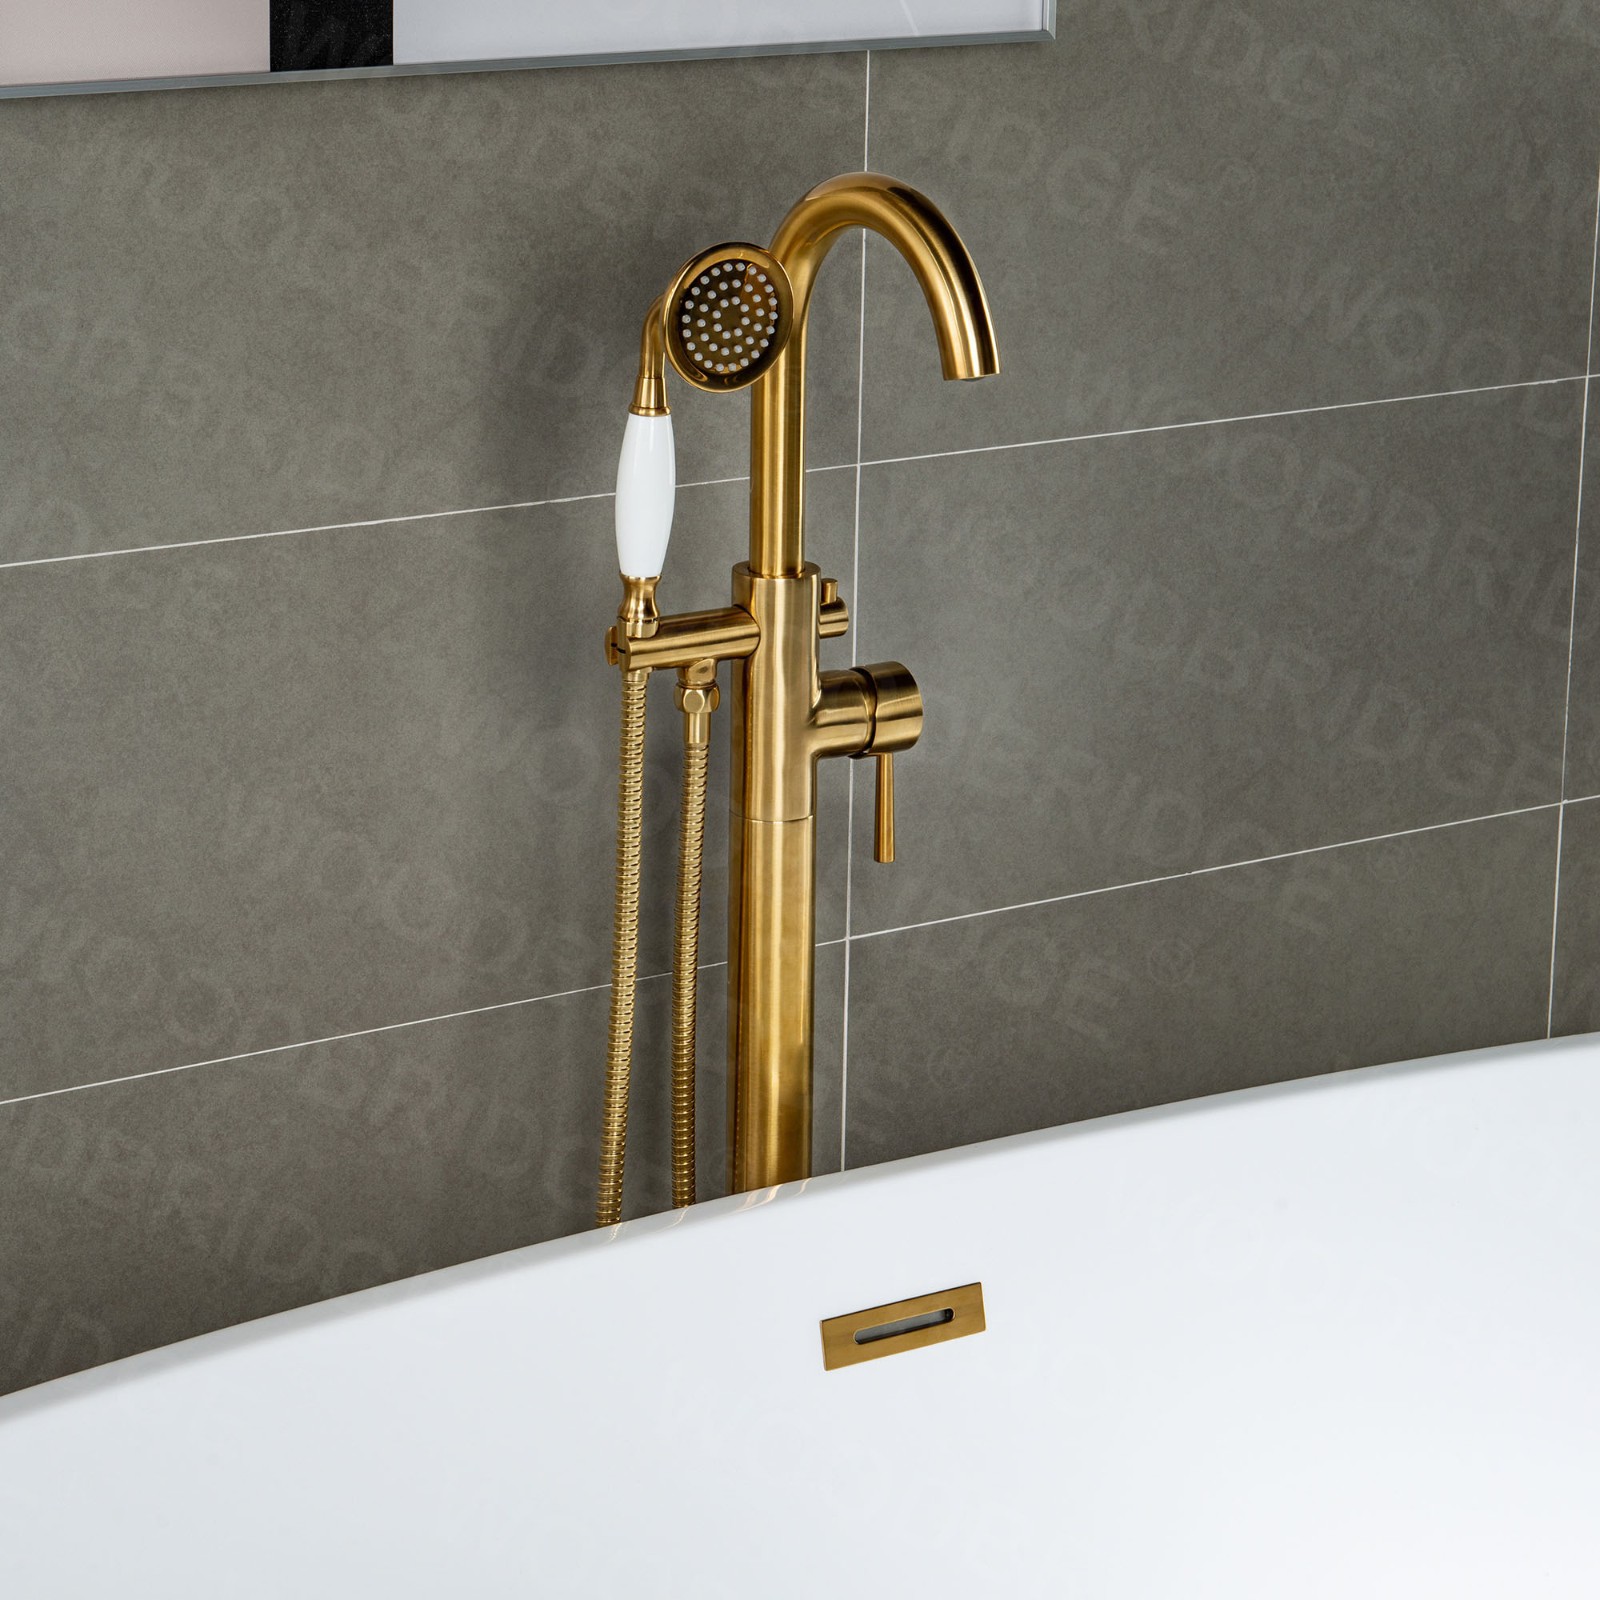  WOODBRIDGE F0007BGVT Fusion Single Handle Floor Mount Freestanding Tub Filler Faucet with Telephone Hand shower in Brushed Gold Finish._6124